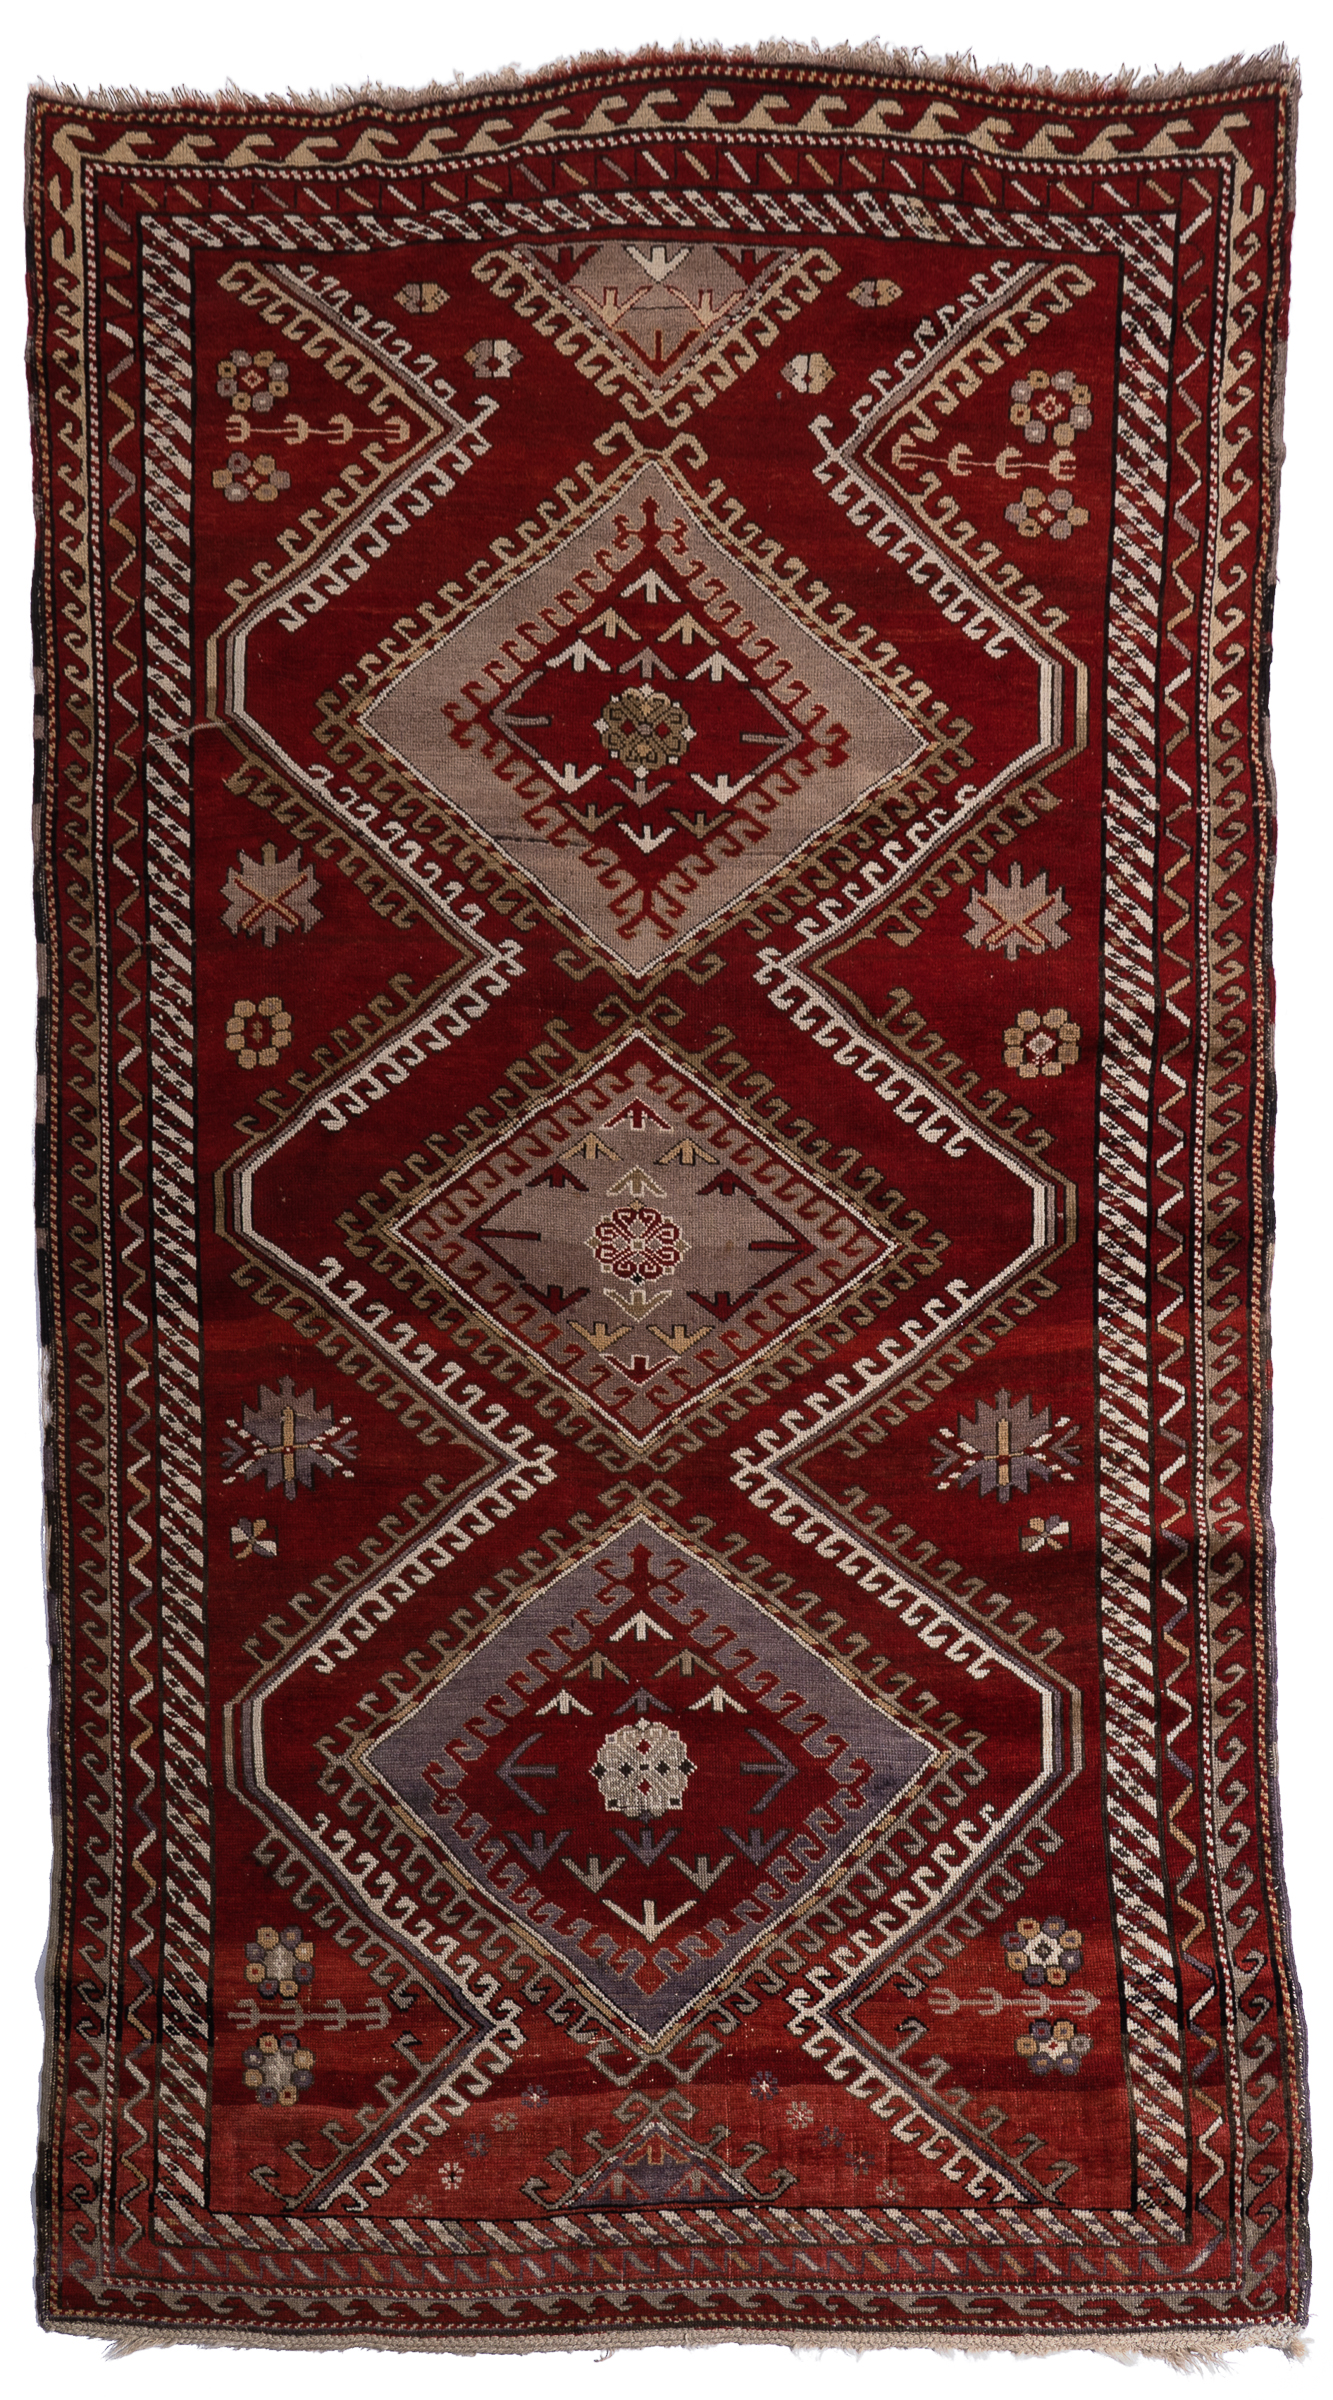 South Caucasian Rug, early 20th century